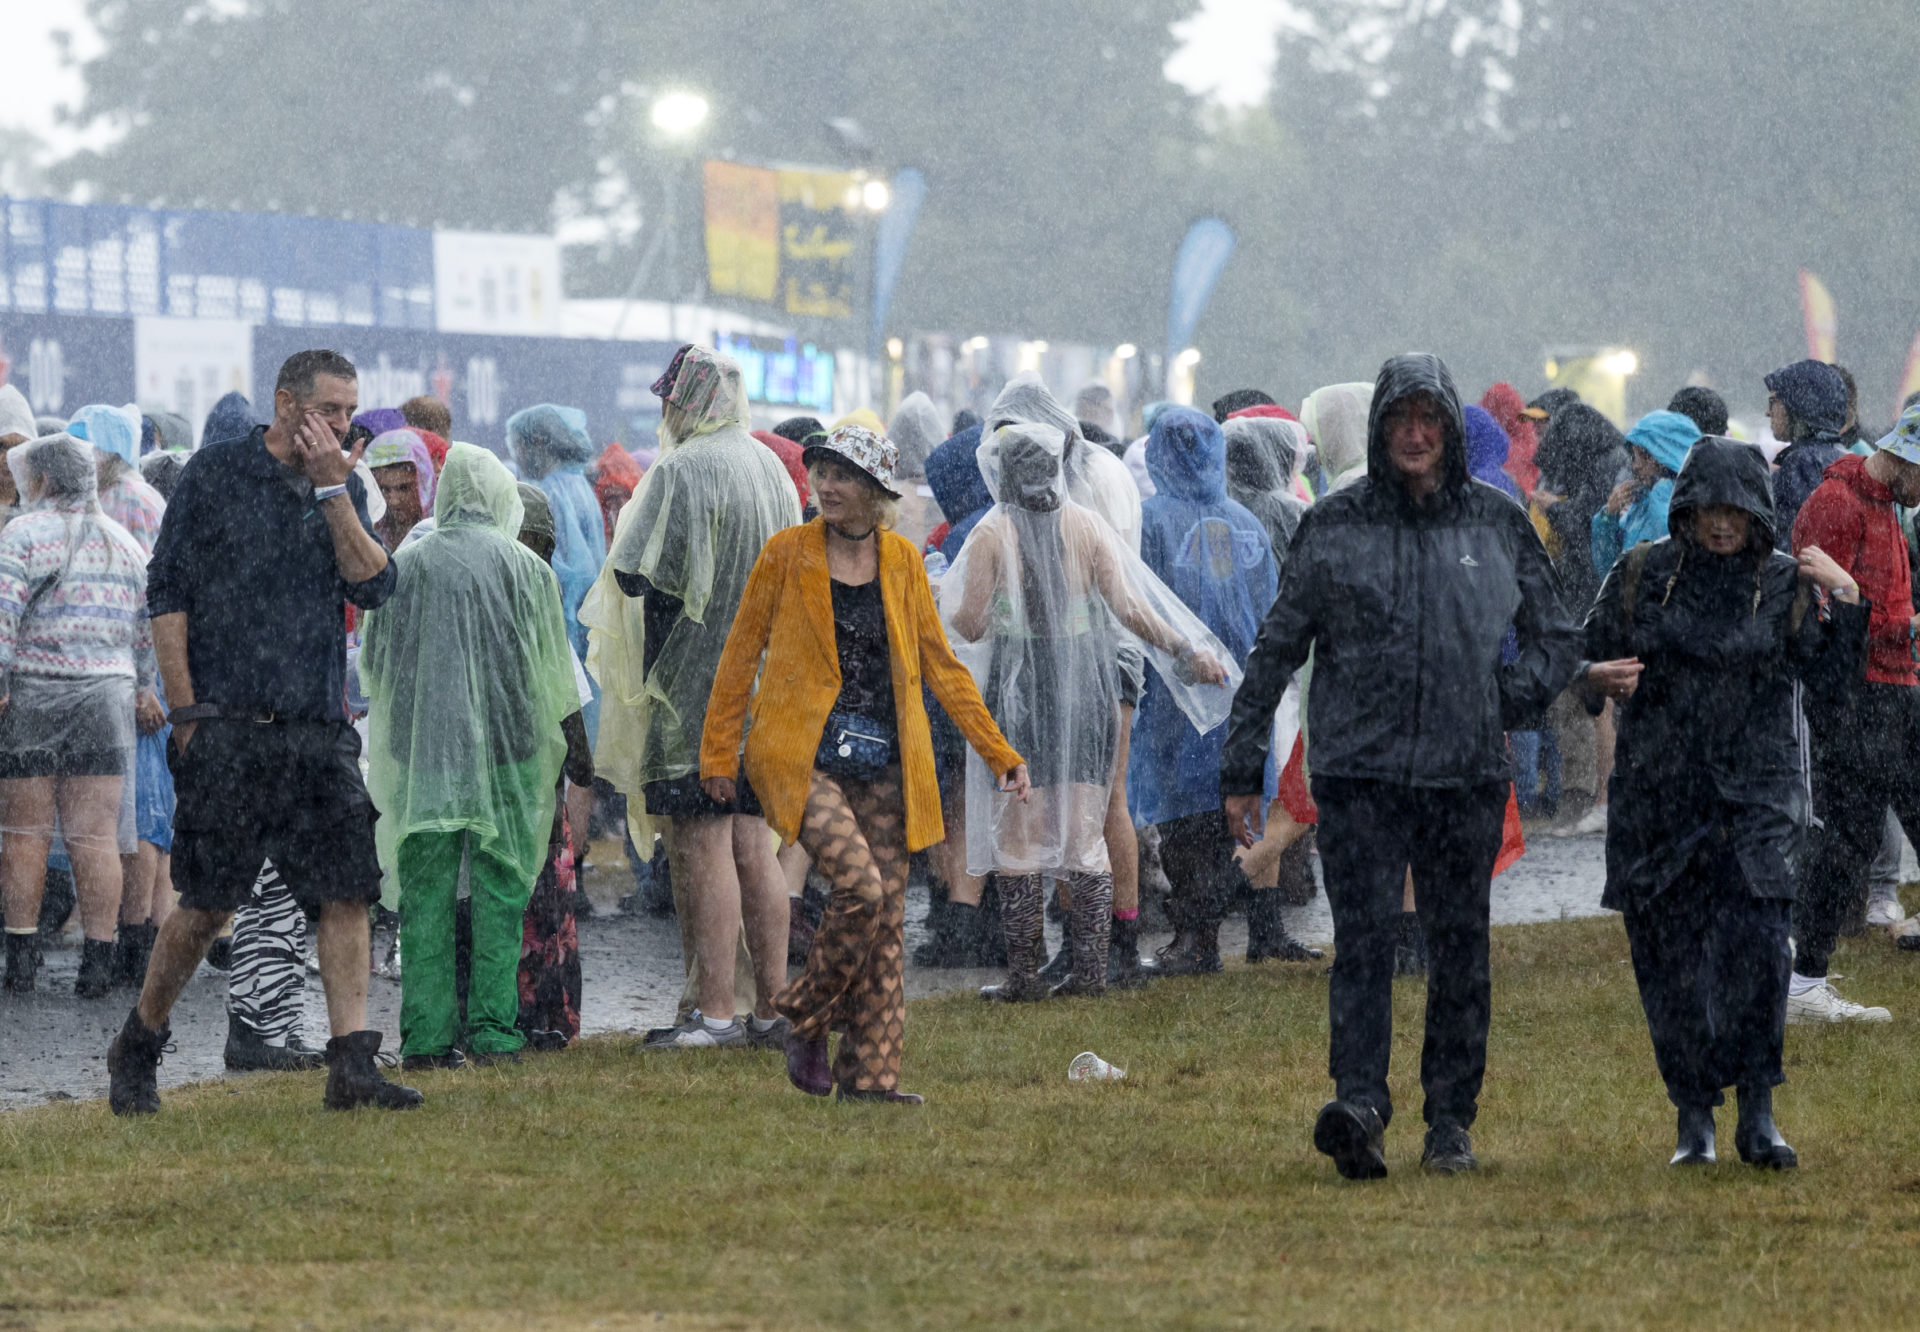 Fans wearing plastic raincoats to protect themselves from the rainy weather at Electric Picnic